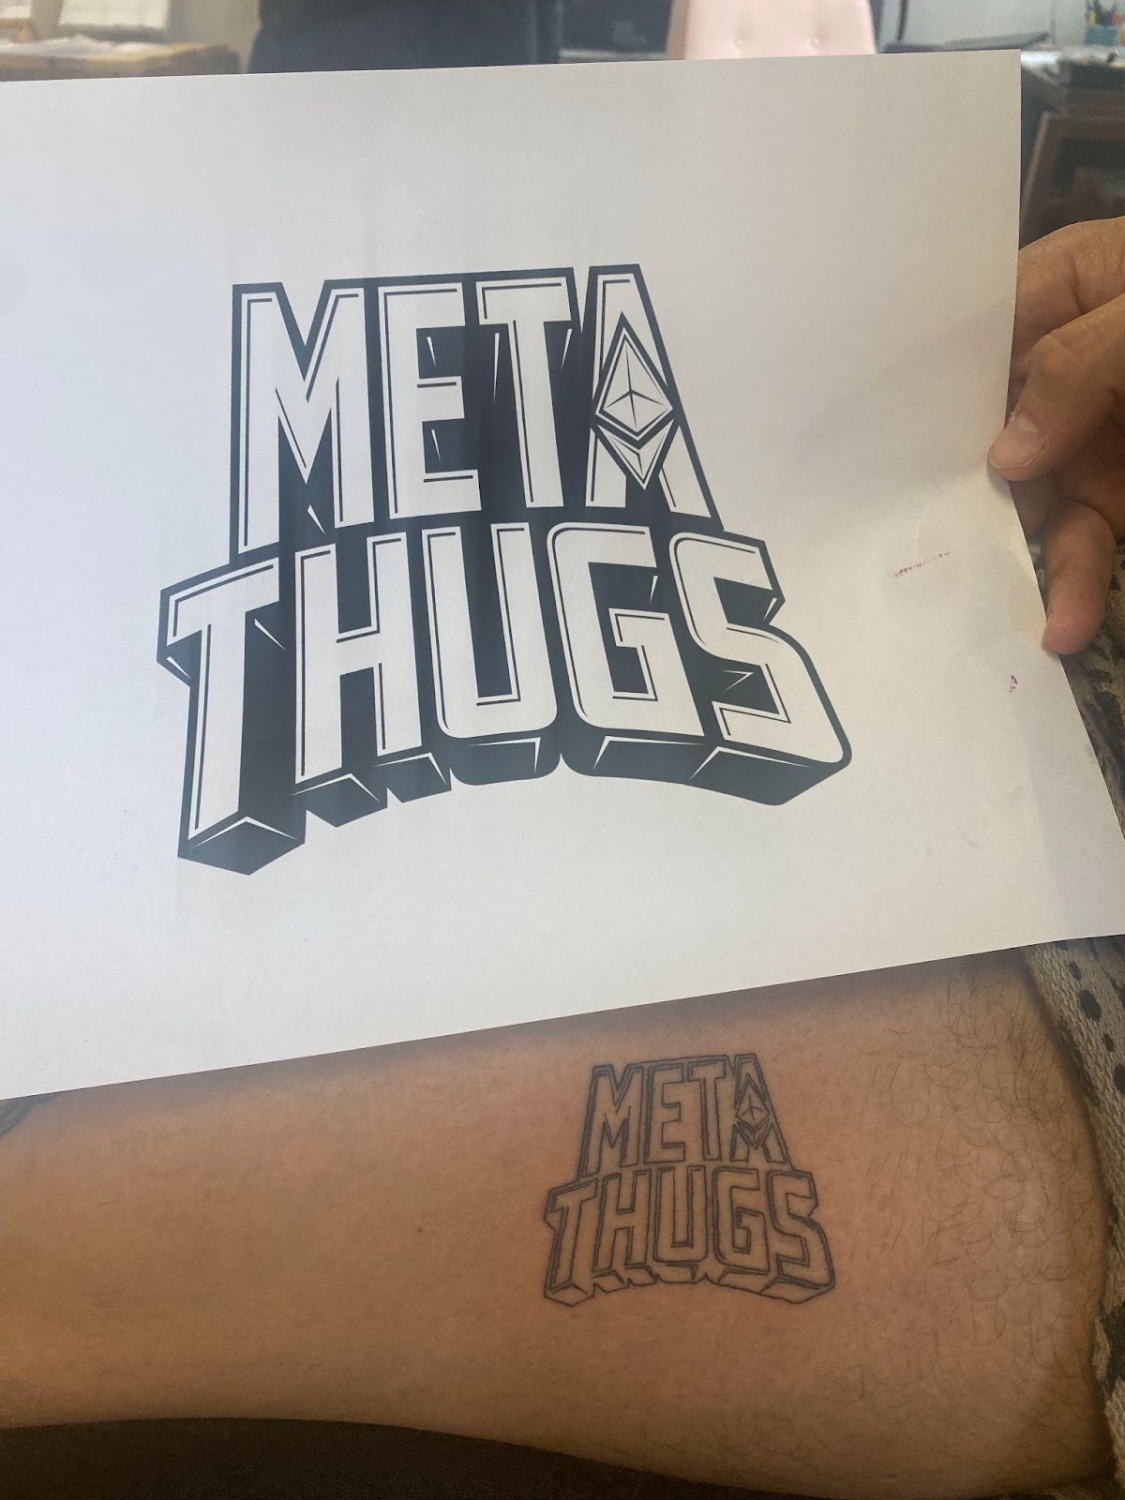 What To Know About The Highly Anticipated Meta Thugs NFT Drop